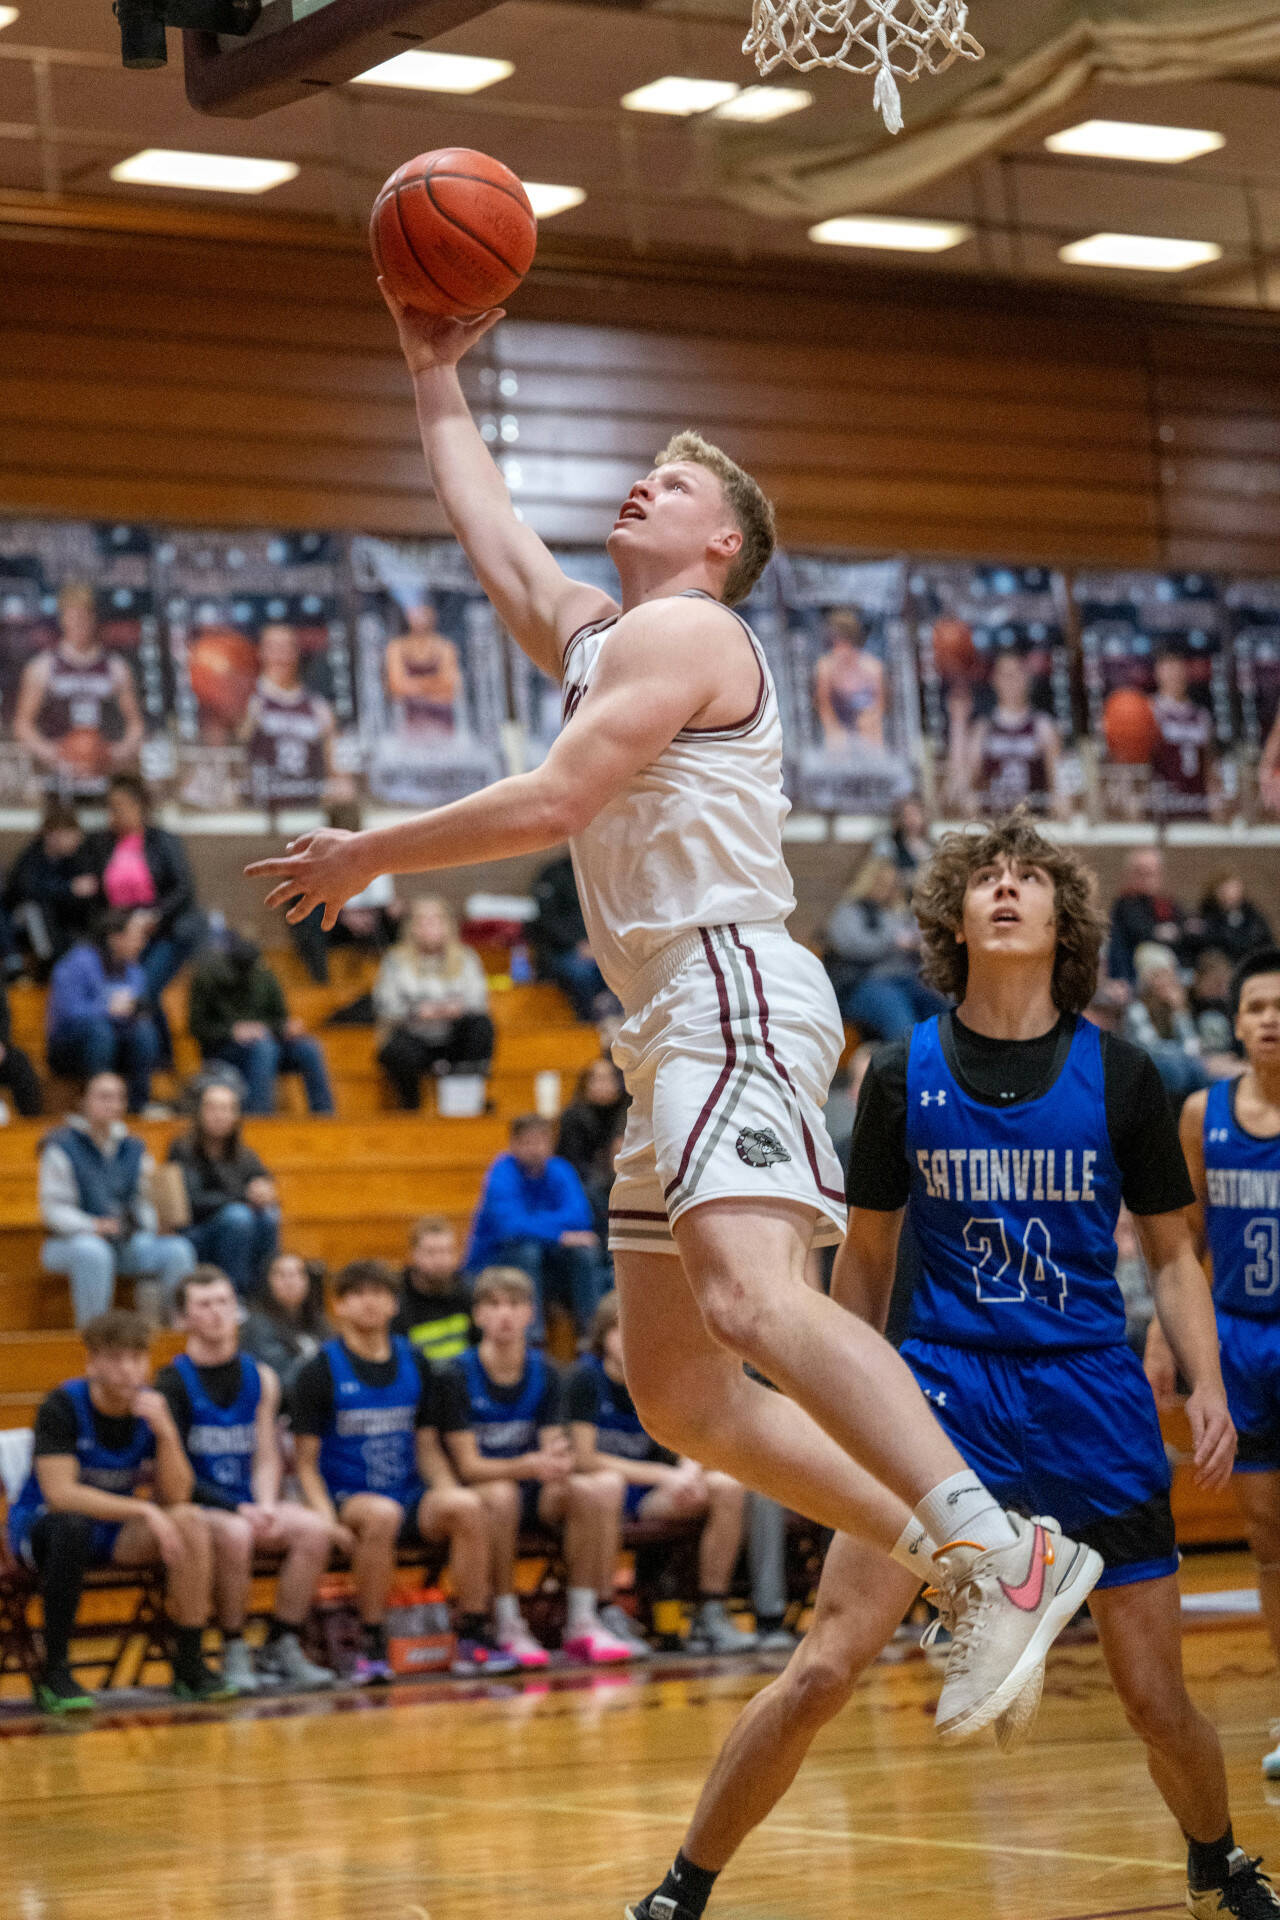 PHOTO BY FOREST WORGUM Montesano’s Tyce Peterson scores on a layup during the Bulldogs’ 61-47 victory over Eatonville on Thursday at Montesano High School.